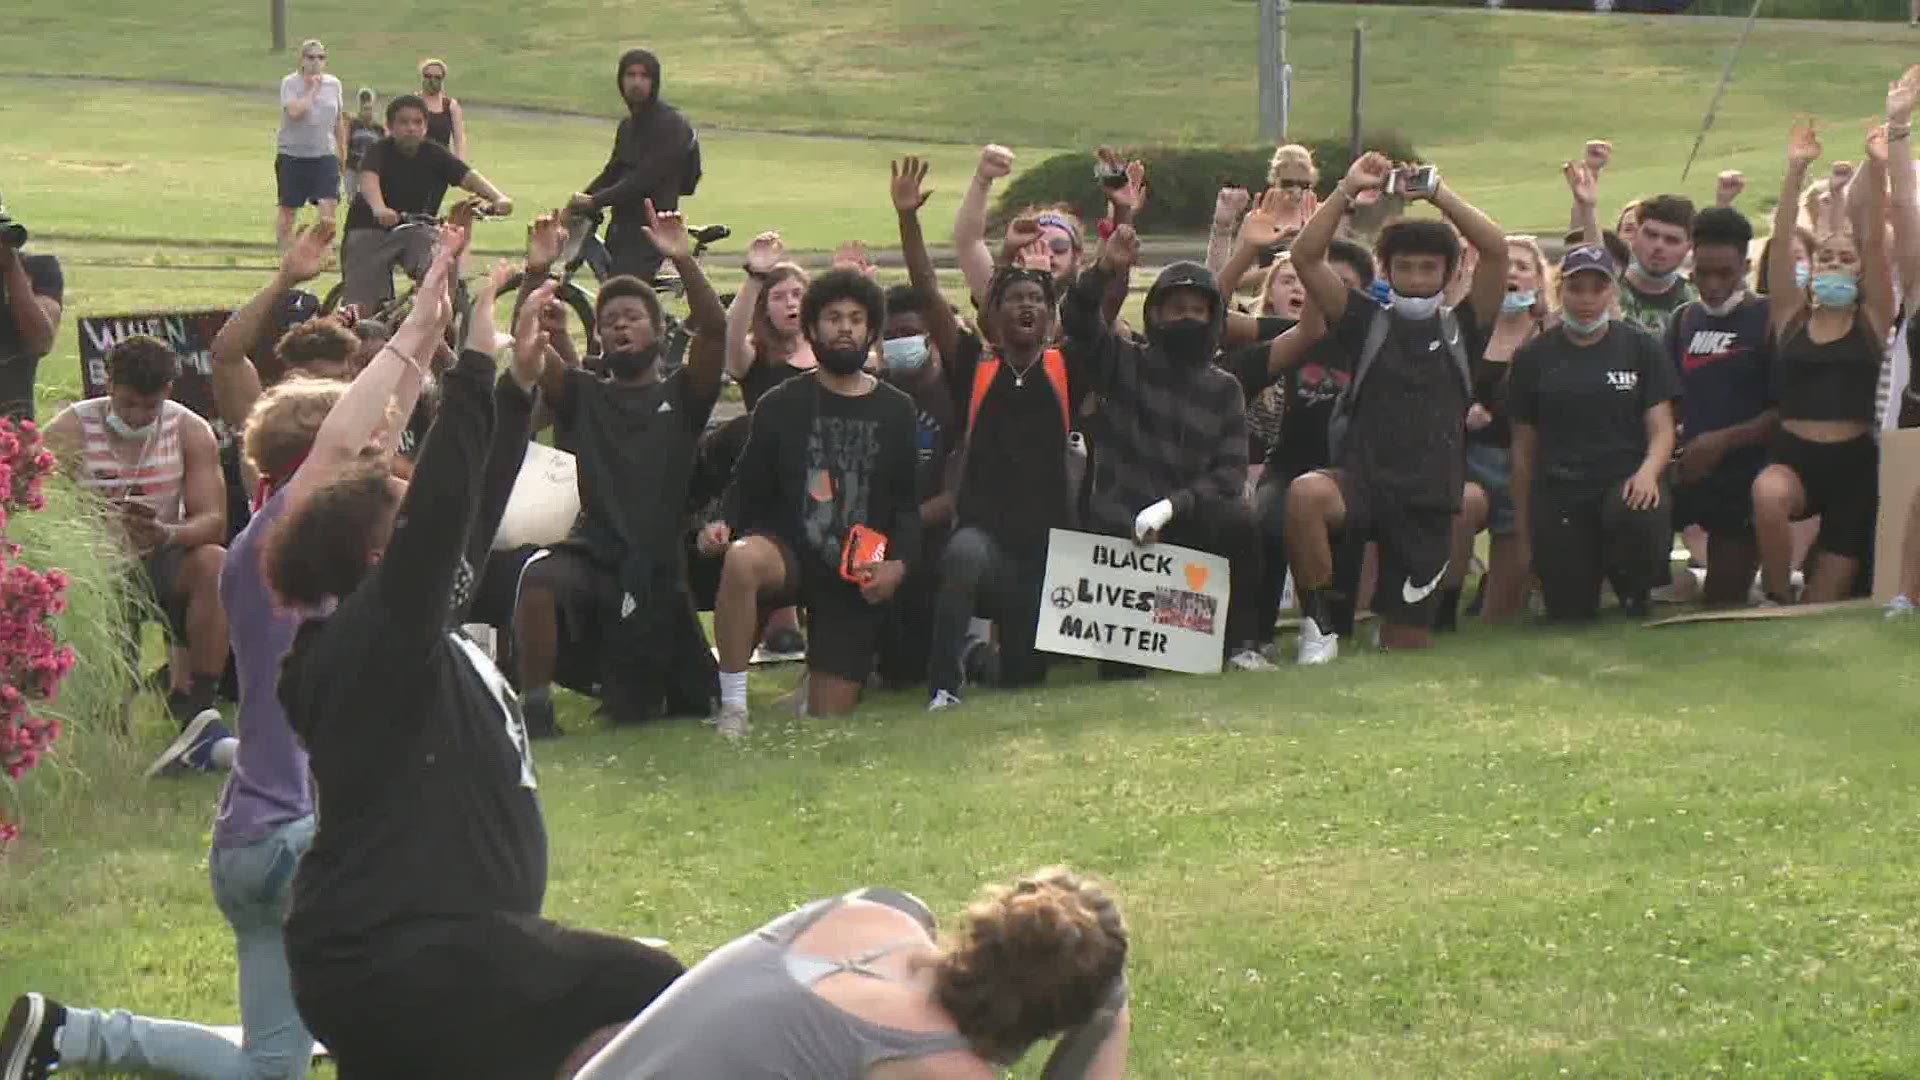 The protest was organized in response to George Floyd's death and to raise awareness around the Black Lives Matter movement and racial injustice.